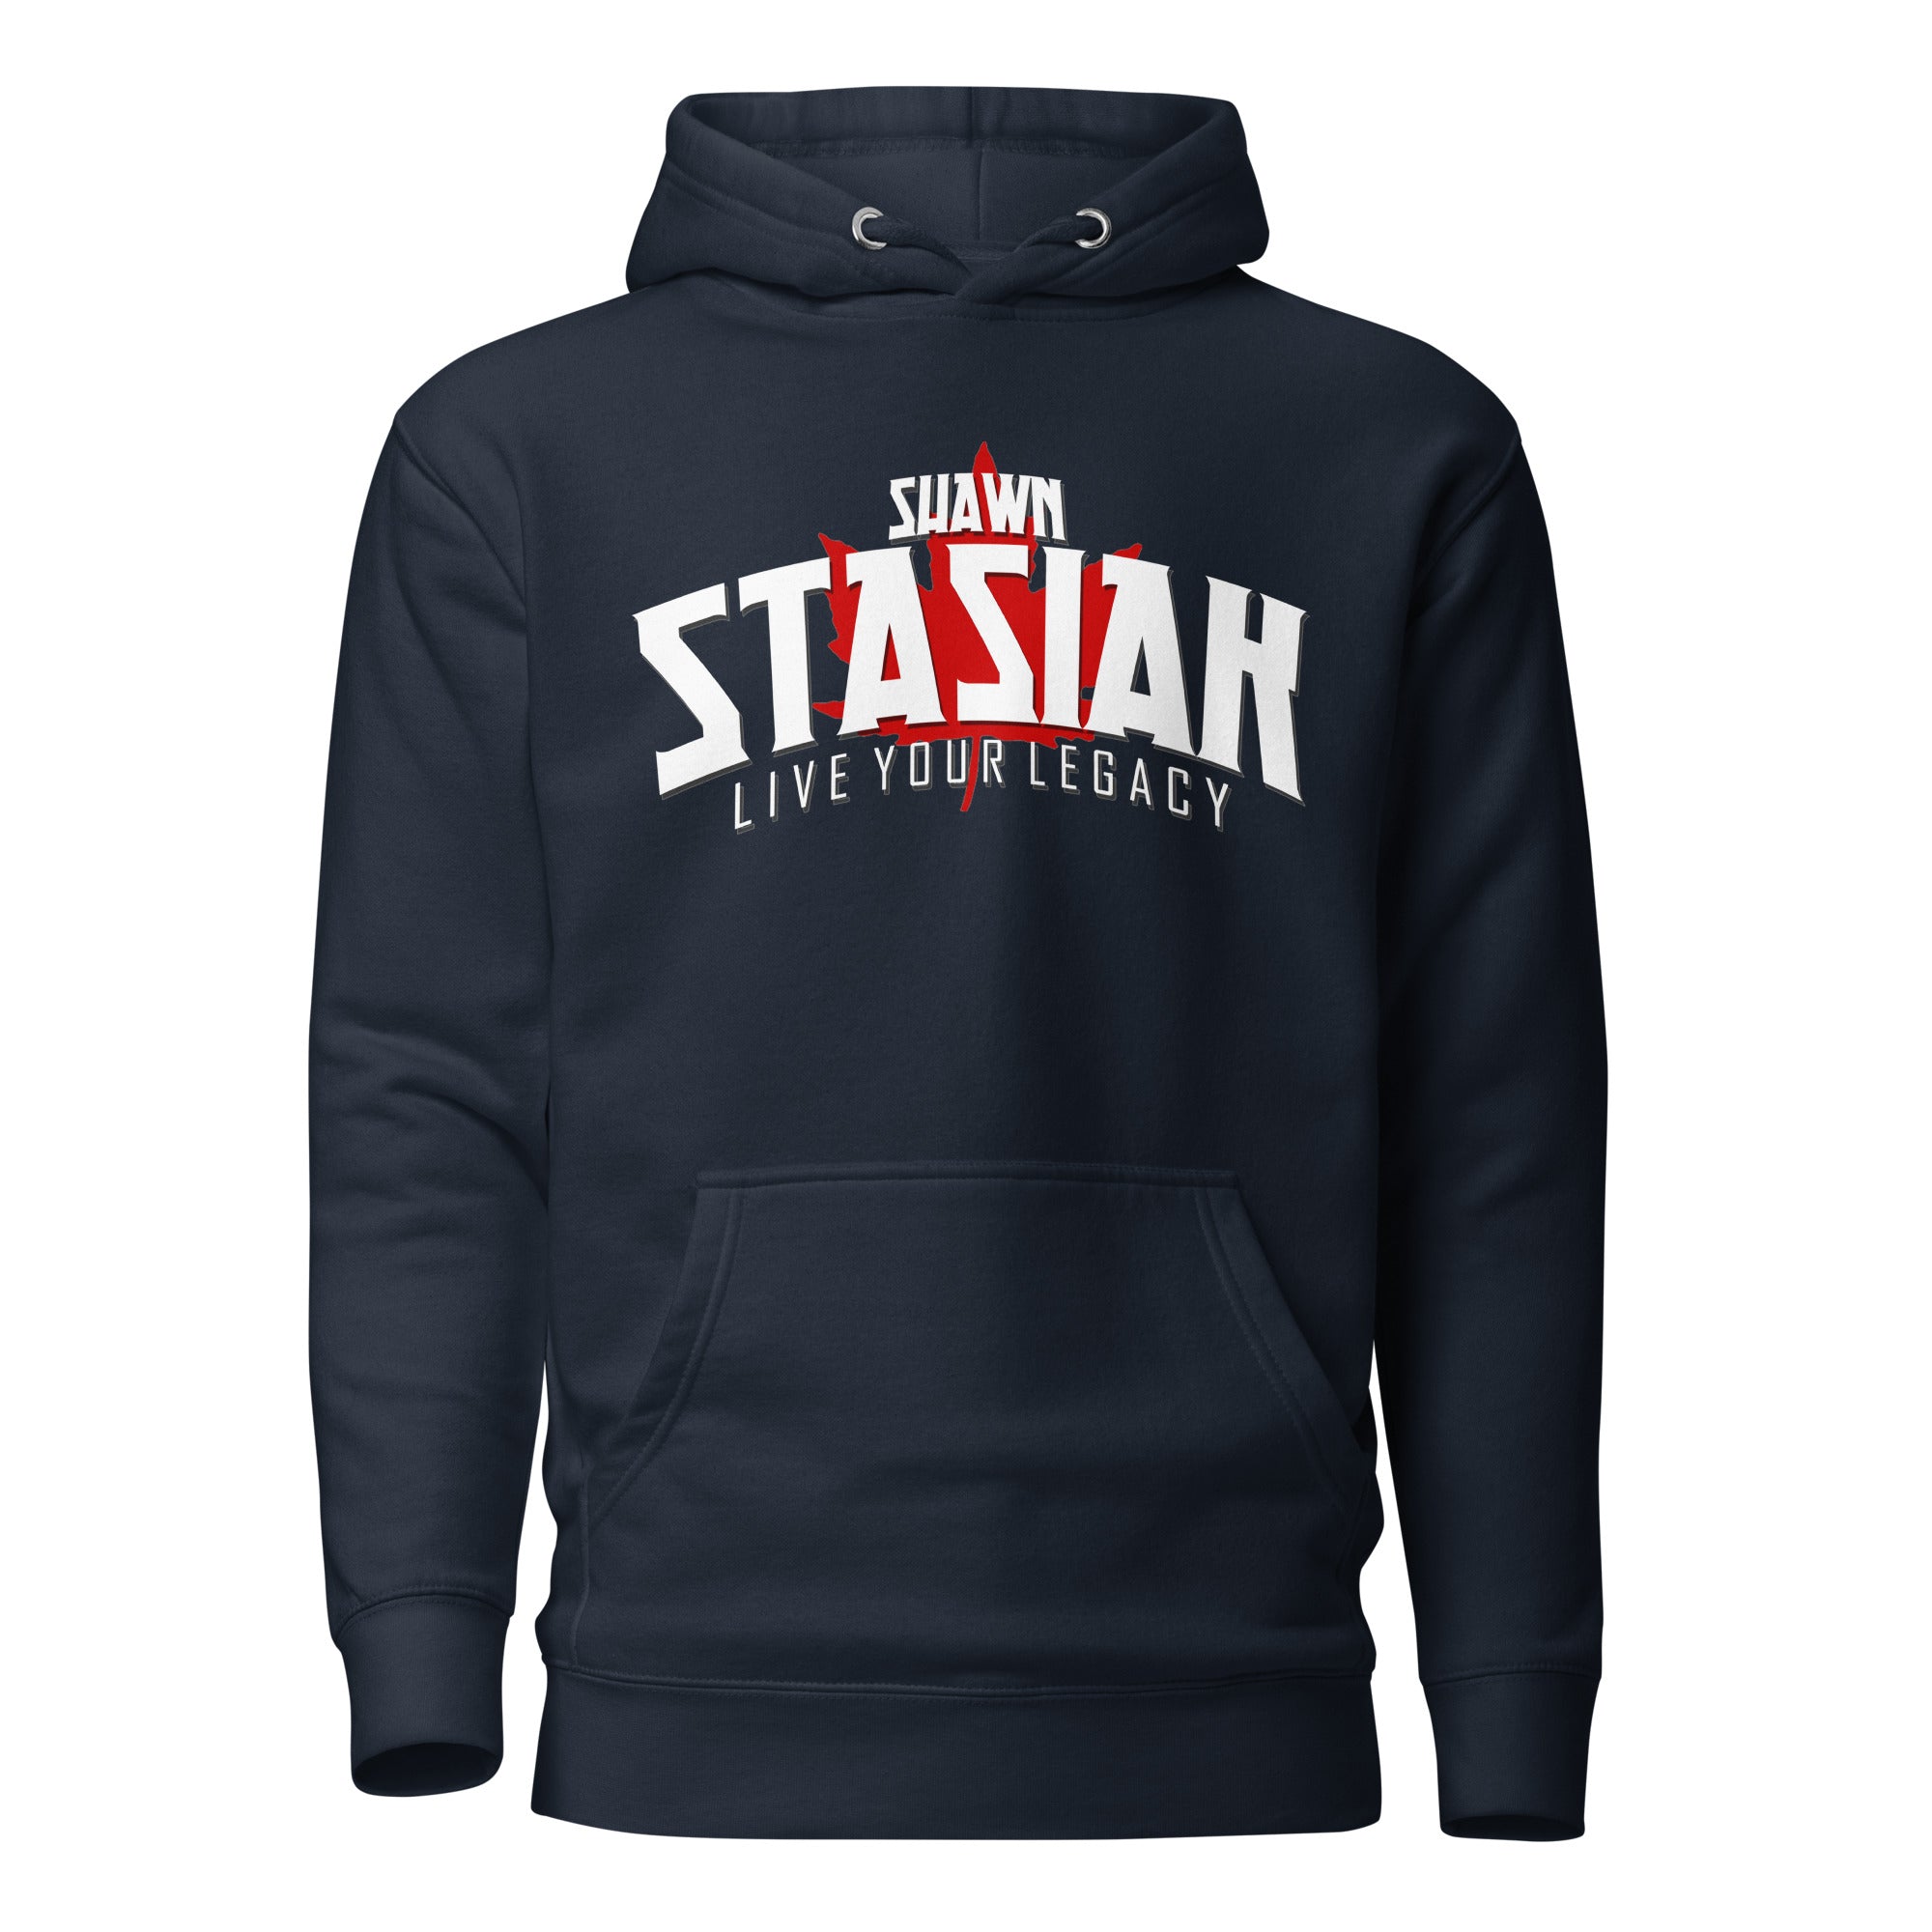 Shawn Stasiak "Live Your Legacy" Canadian Unisex Hoodie